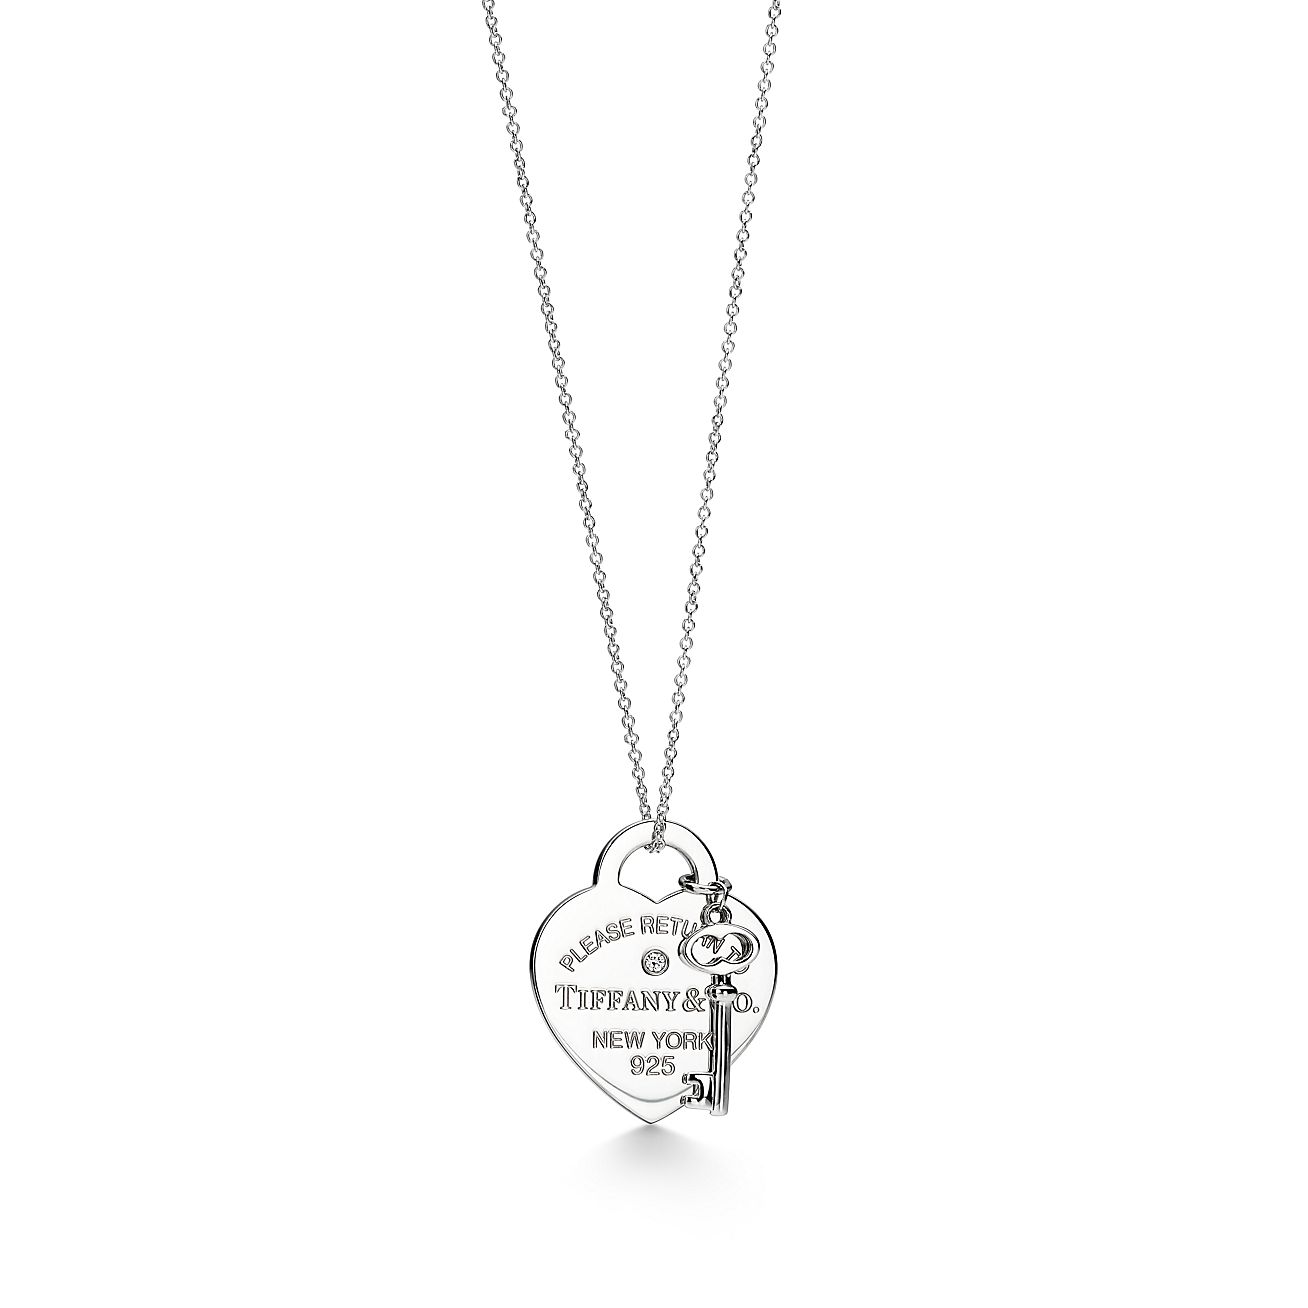 return-to-tiffany-heart-tag-and-key-necklace-in-silver-with-a-diamond